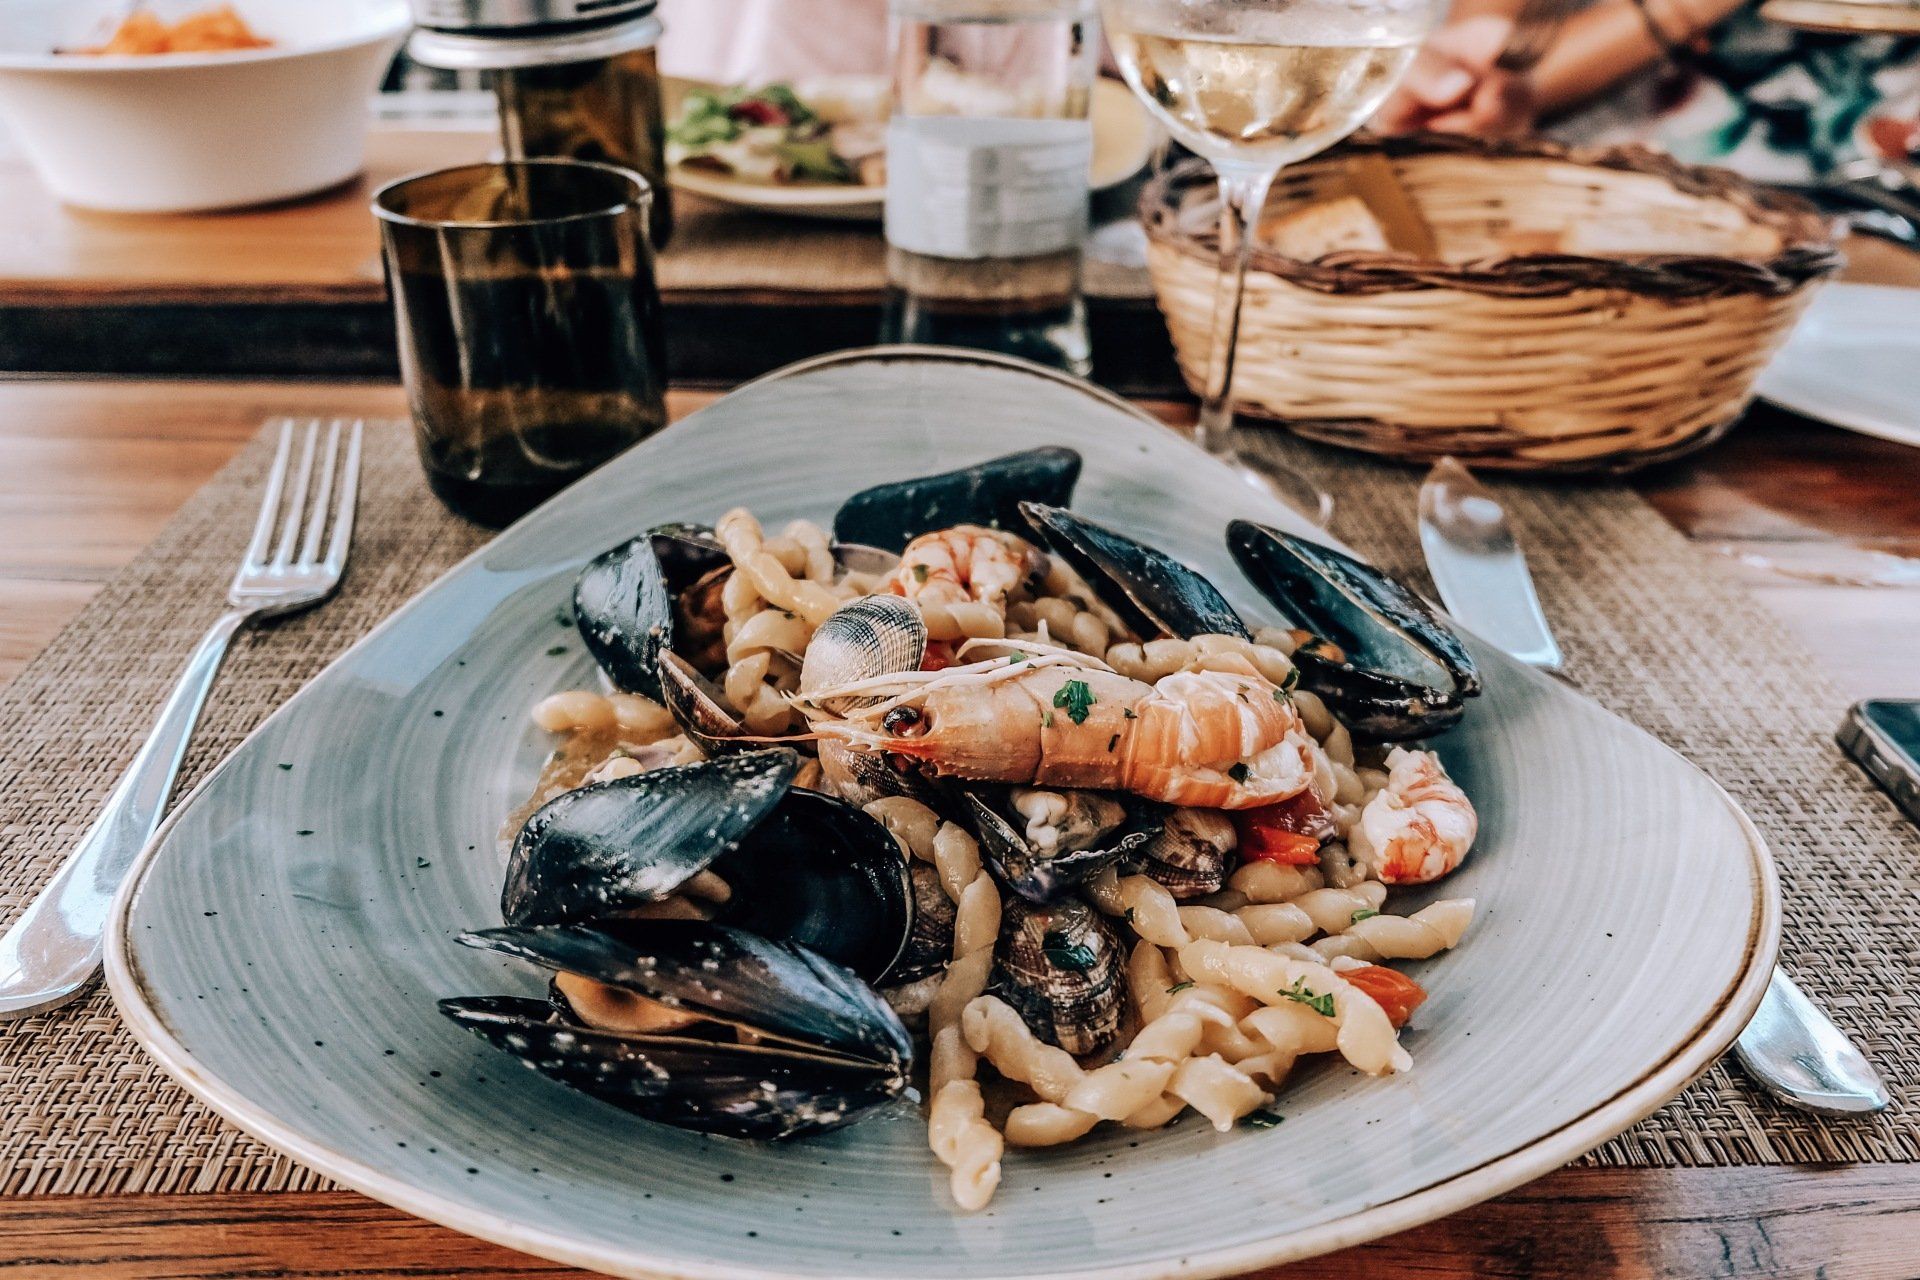 A plate of pasta with mussels and shrimp on a table.